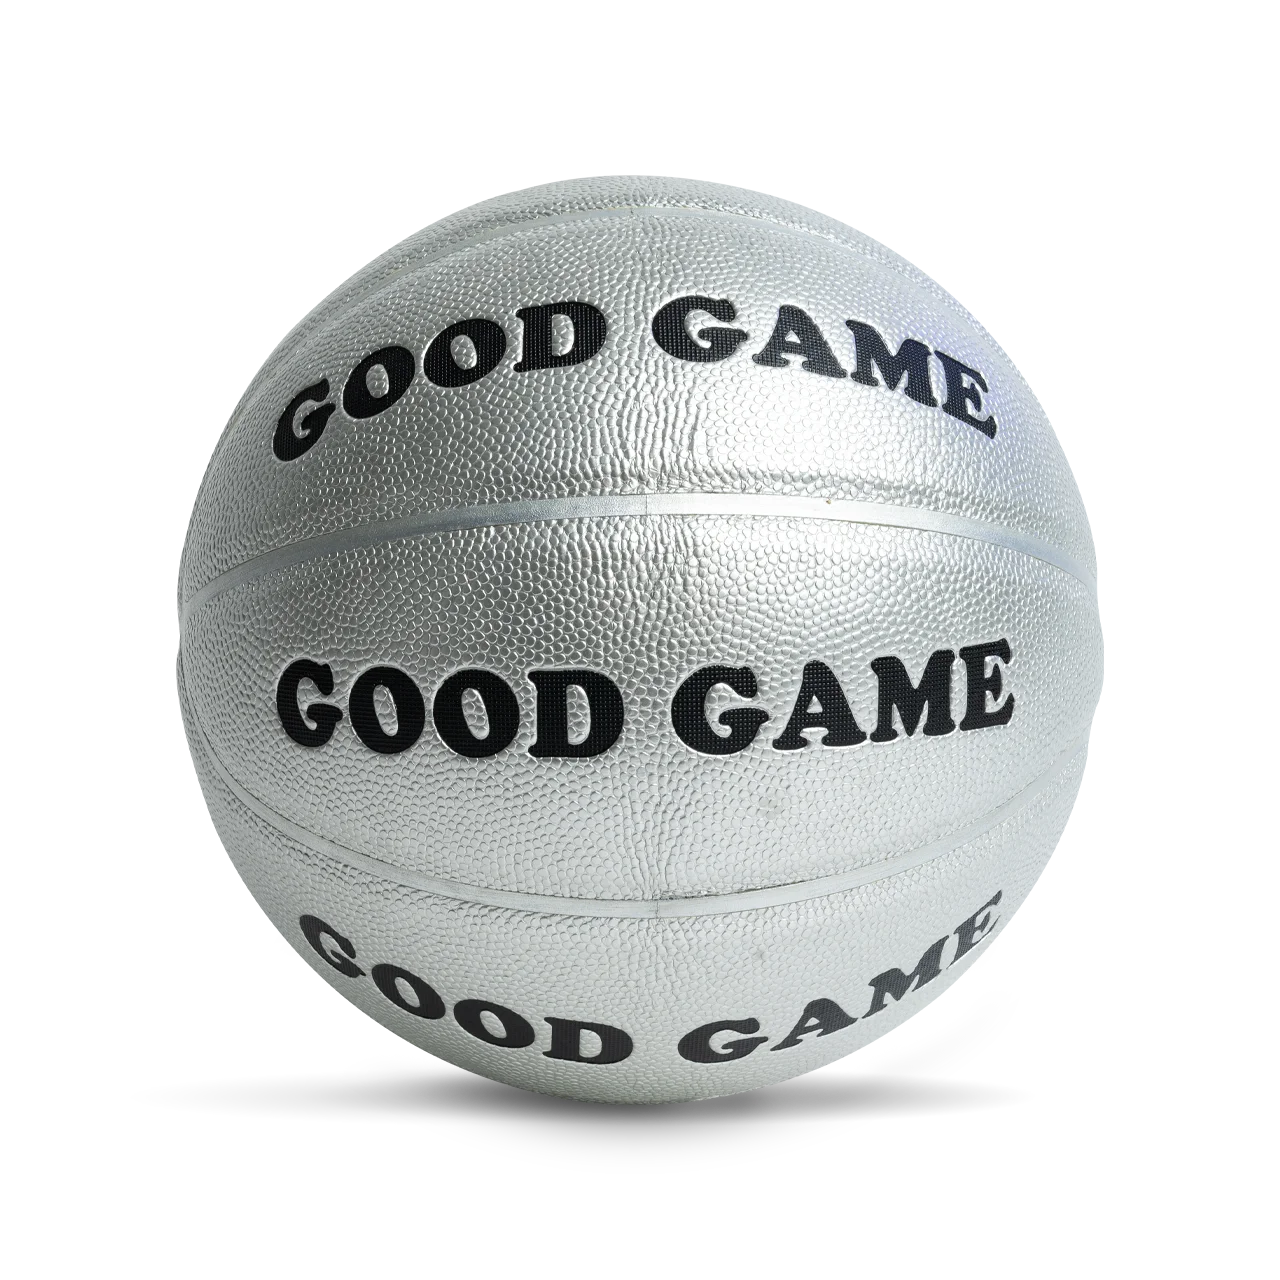 A Basketball with "Good Game" on it.